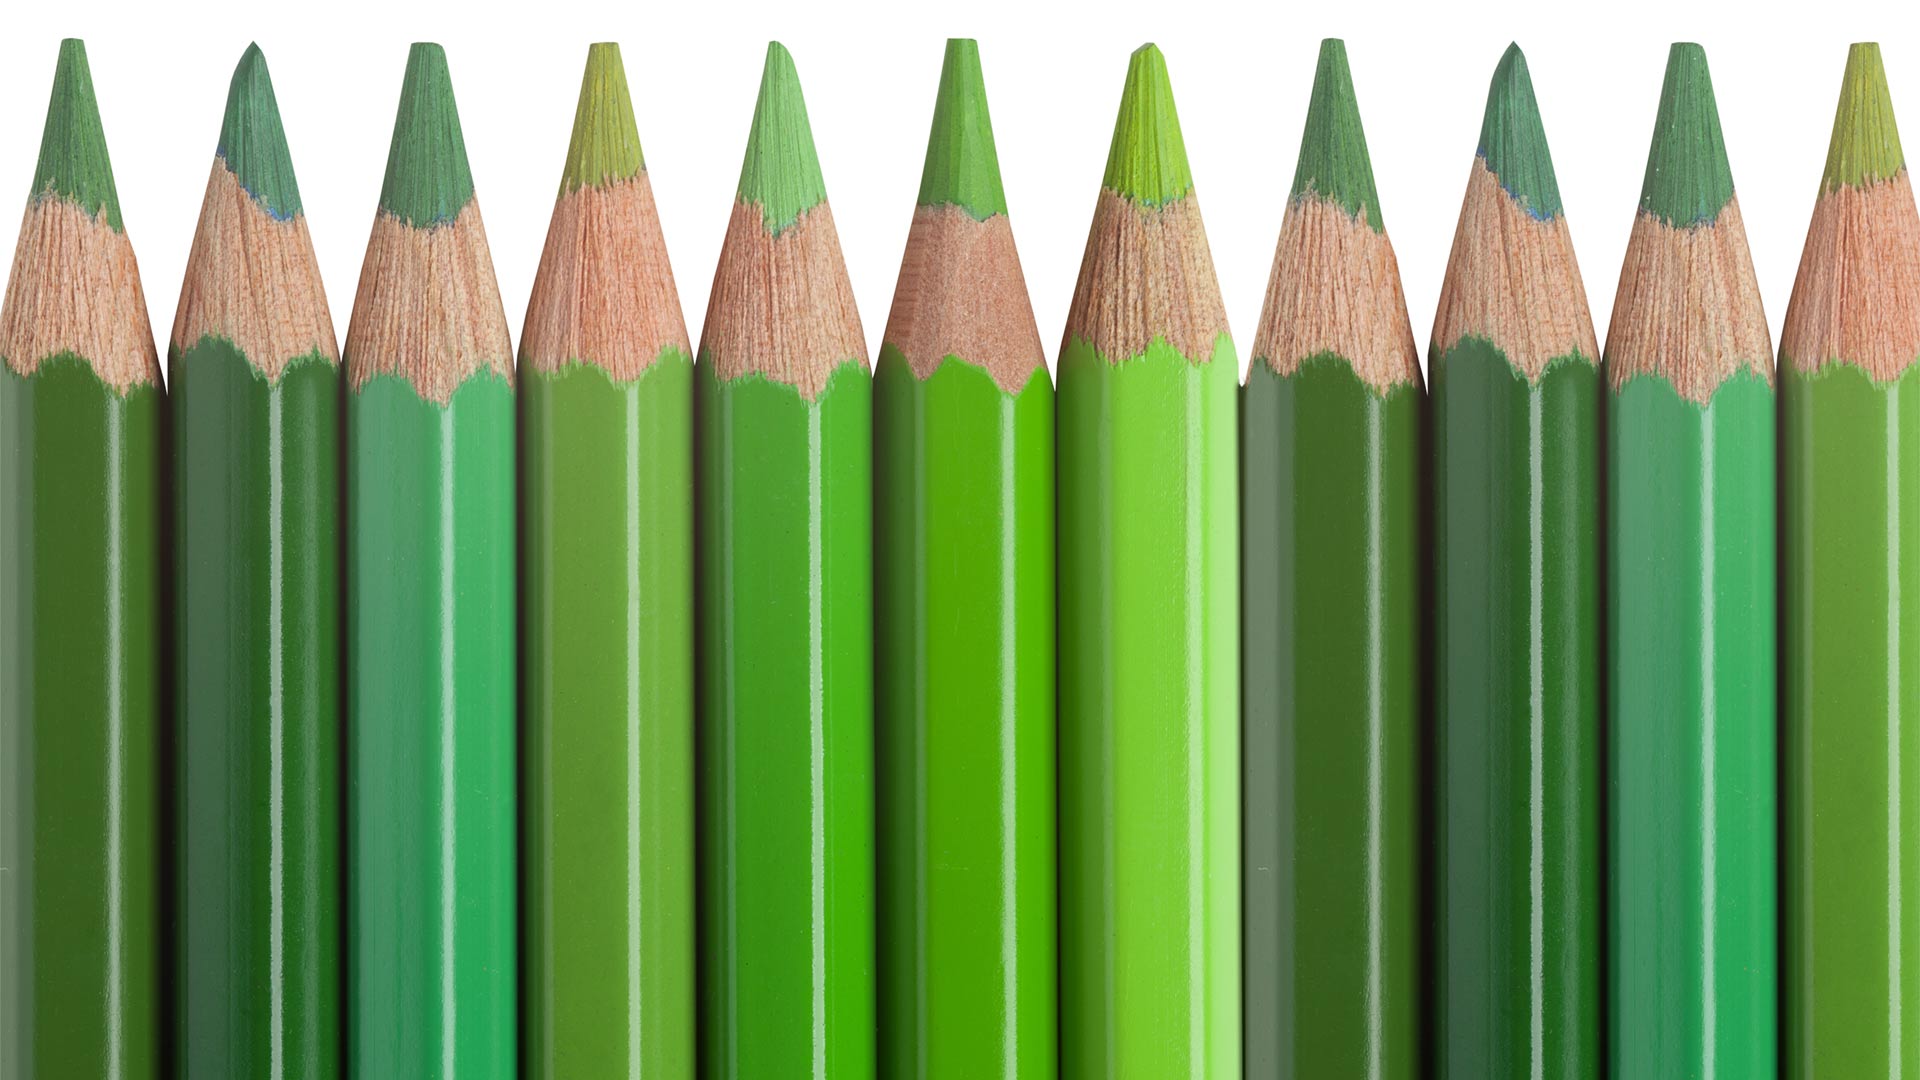 A row of pencils all in different shades of green